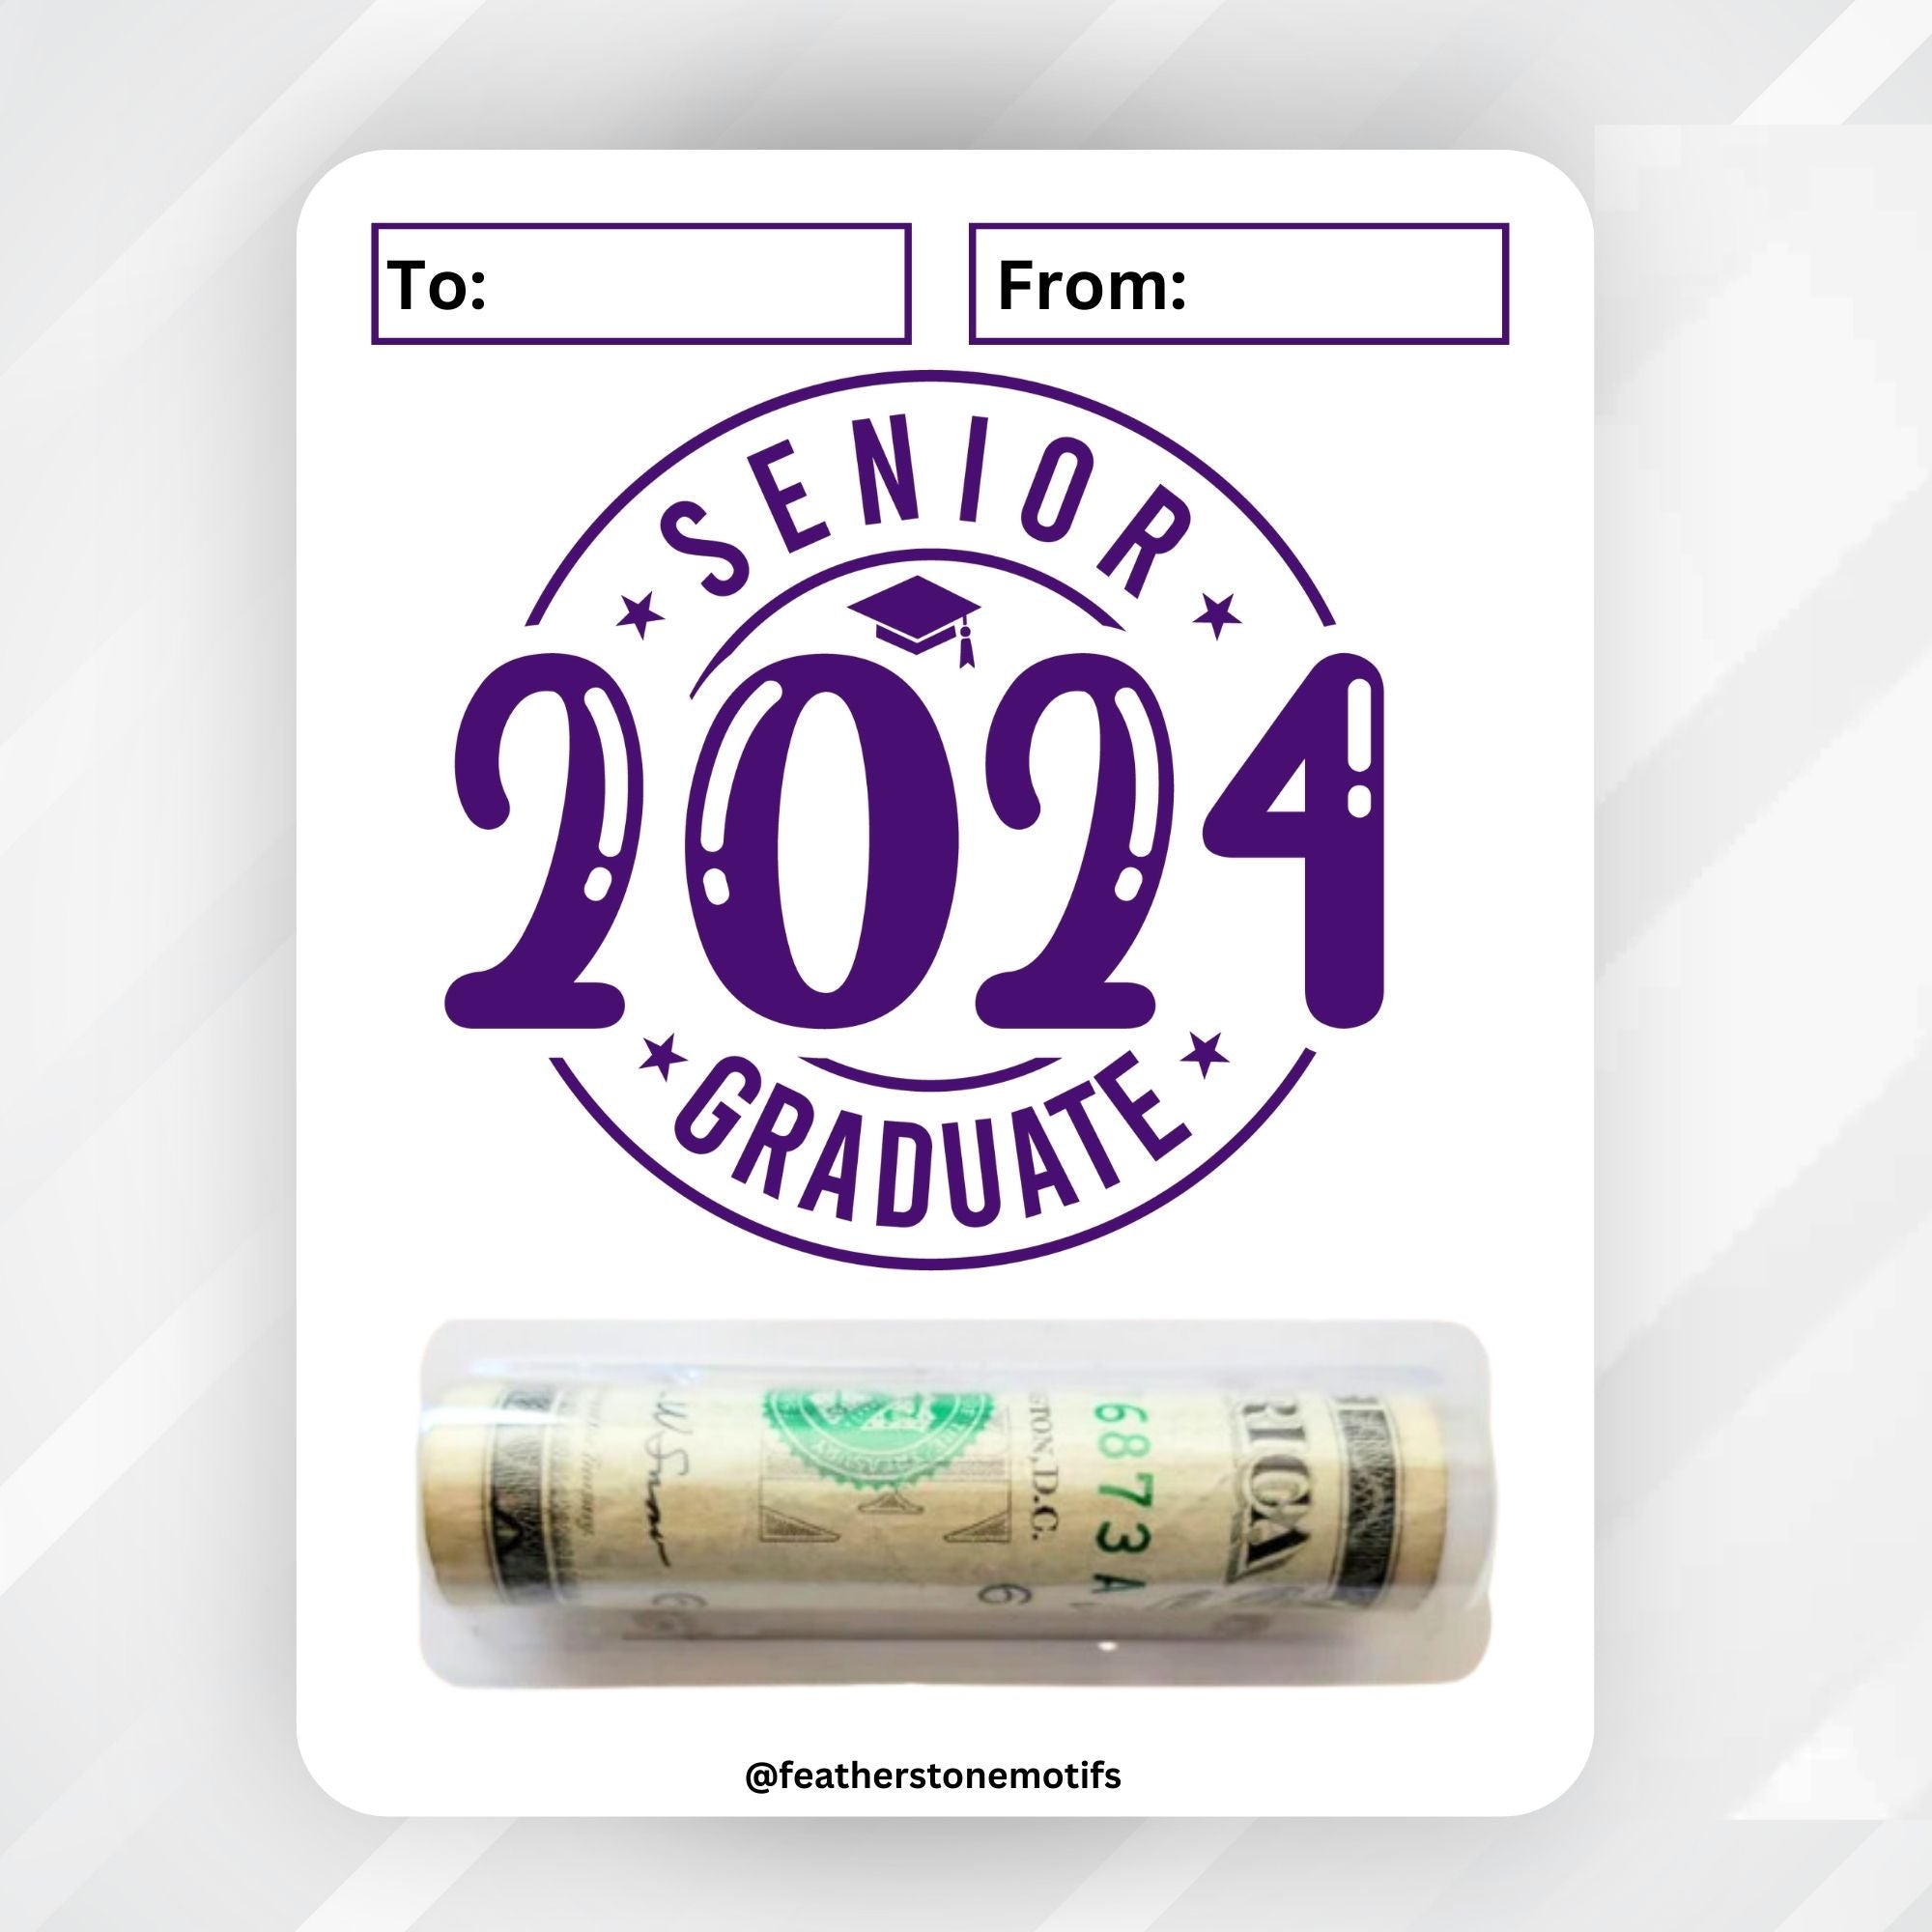 This image shows the money tube attached to the 2024 Graduate Money Card.